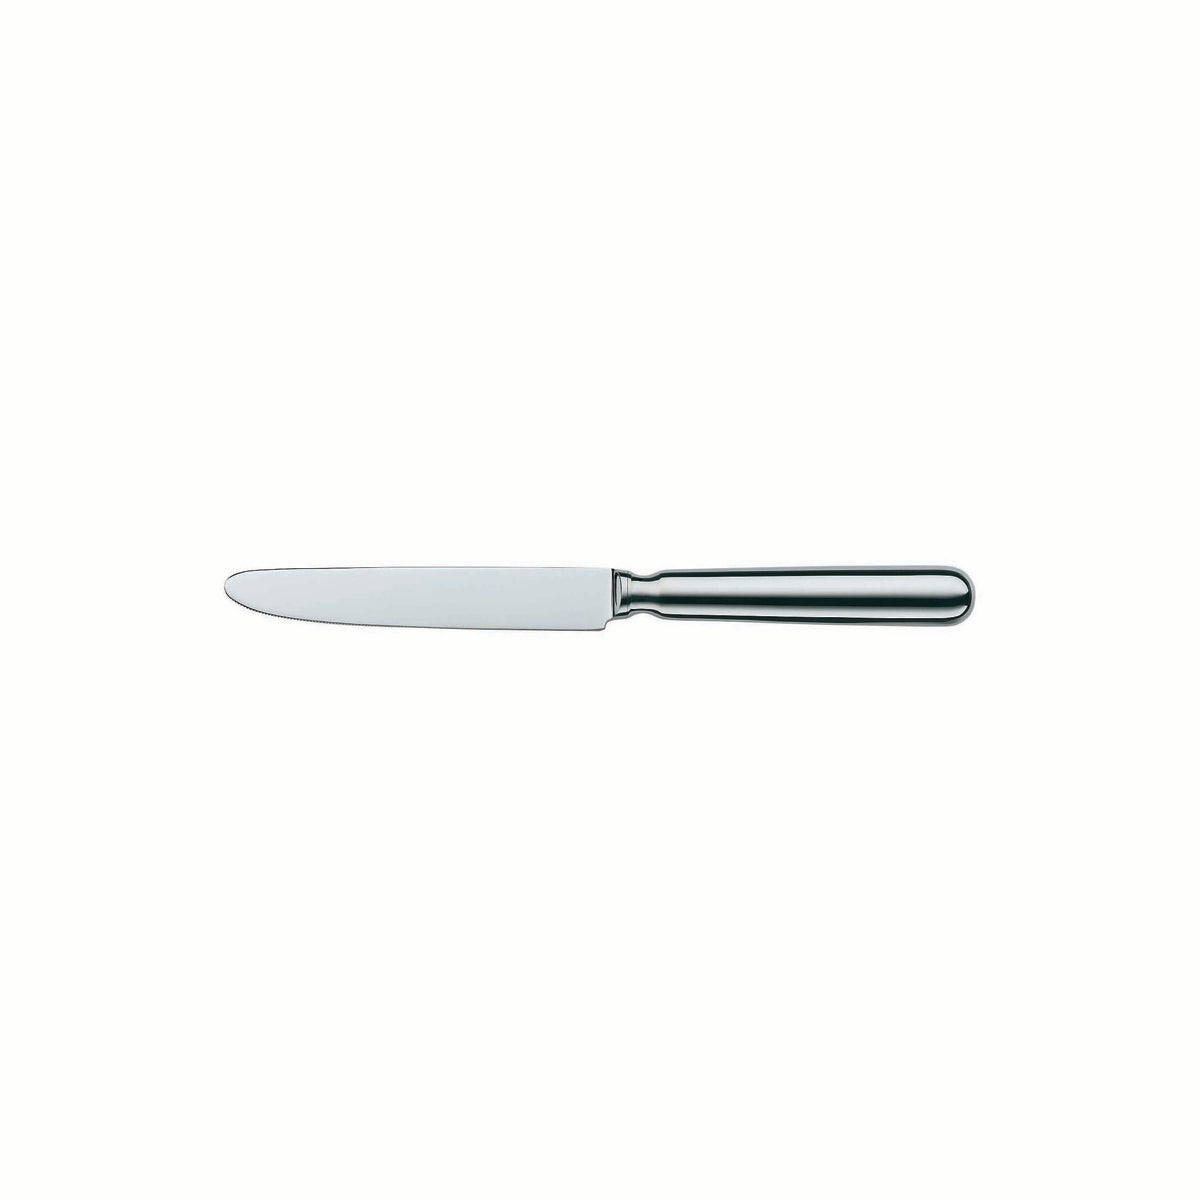 01.0103.6067 WMF Baguette Table Knife - Hollow Handle Silverplated Tomkin Australia Hospitality Supplies